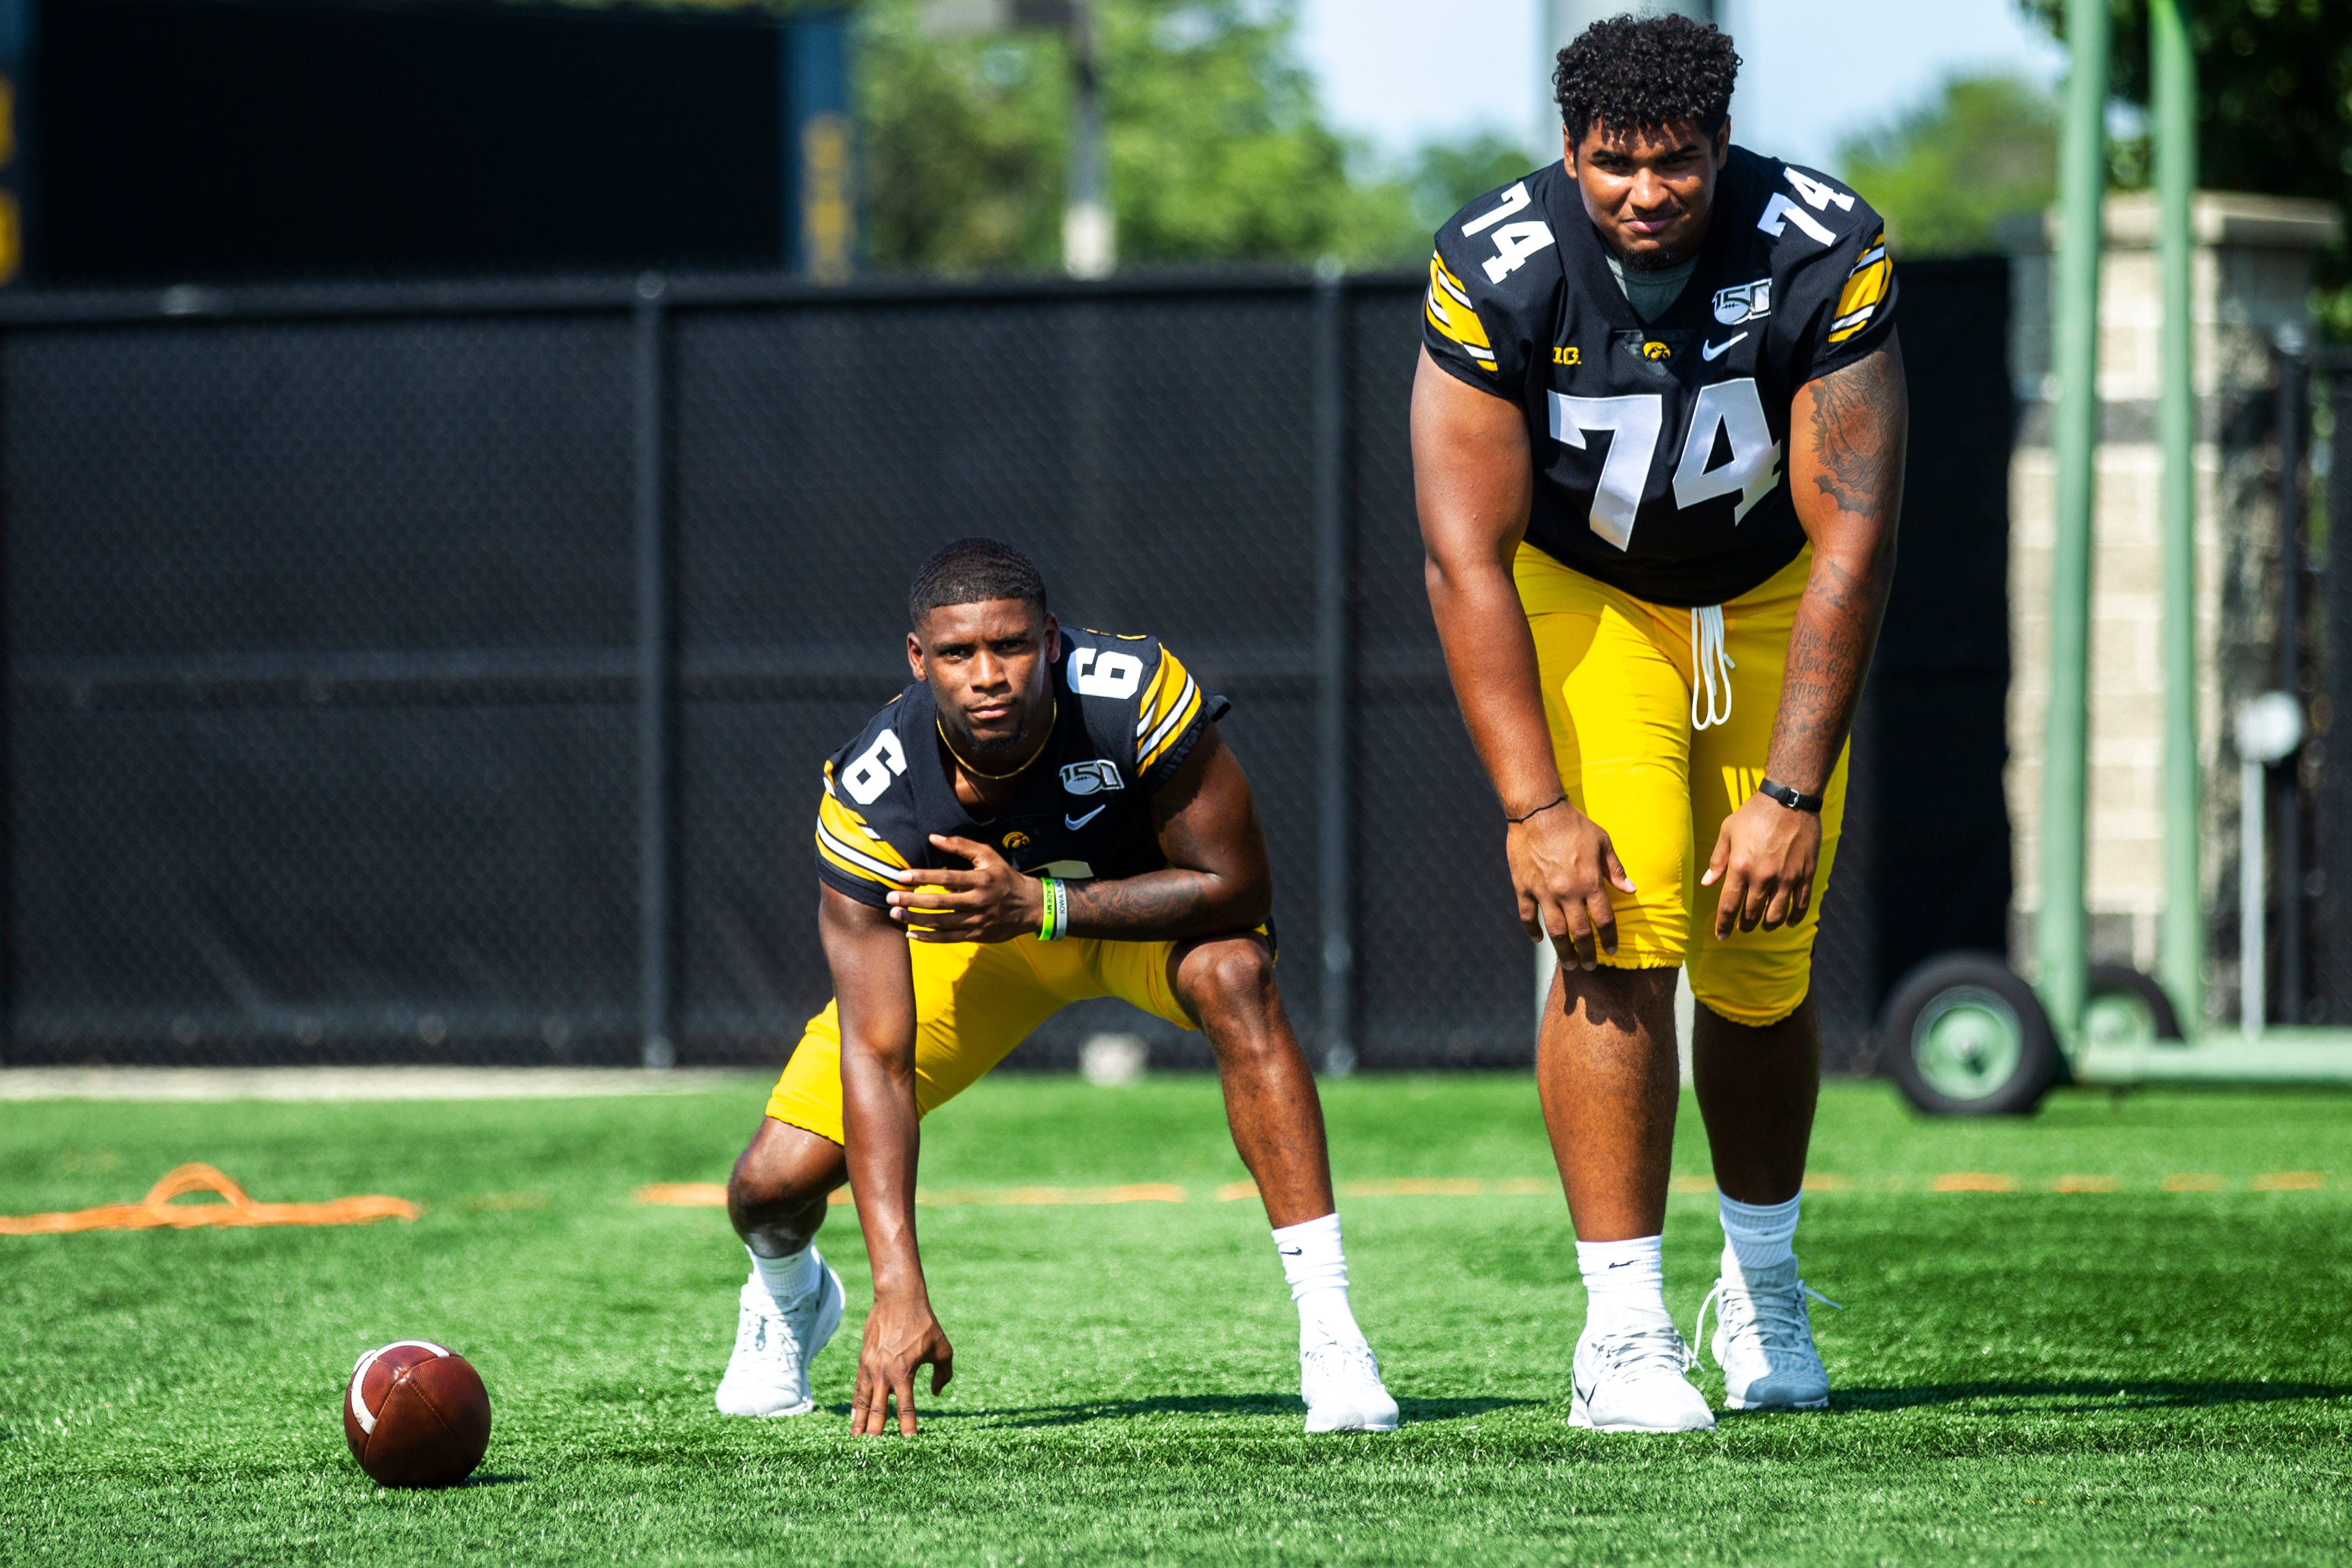 Iowa's Ihmir Smith-Marsette, left, and Tristan Wirfs swap positions while posing for a photo during Hawkeyes football media day, Friday, Aug. 9, 2019, at the University of Iowa outdoor practice facility in Iowa City, Iowa.